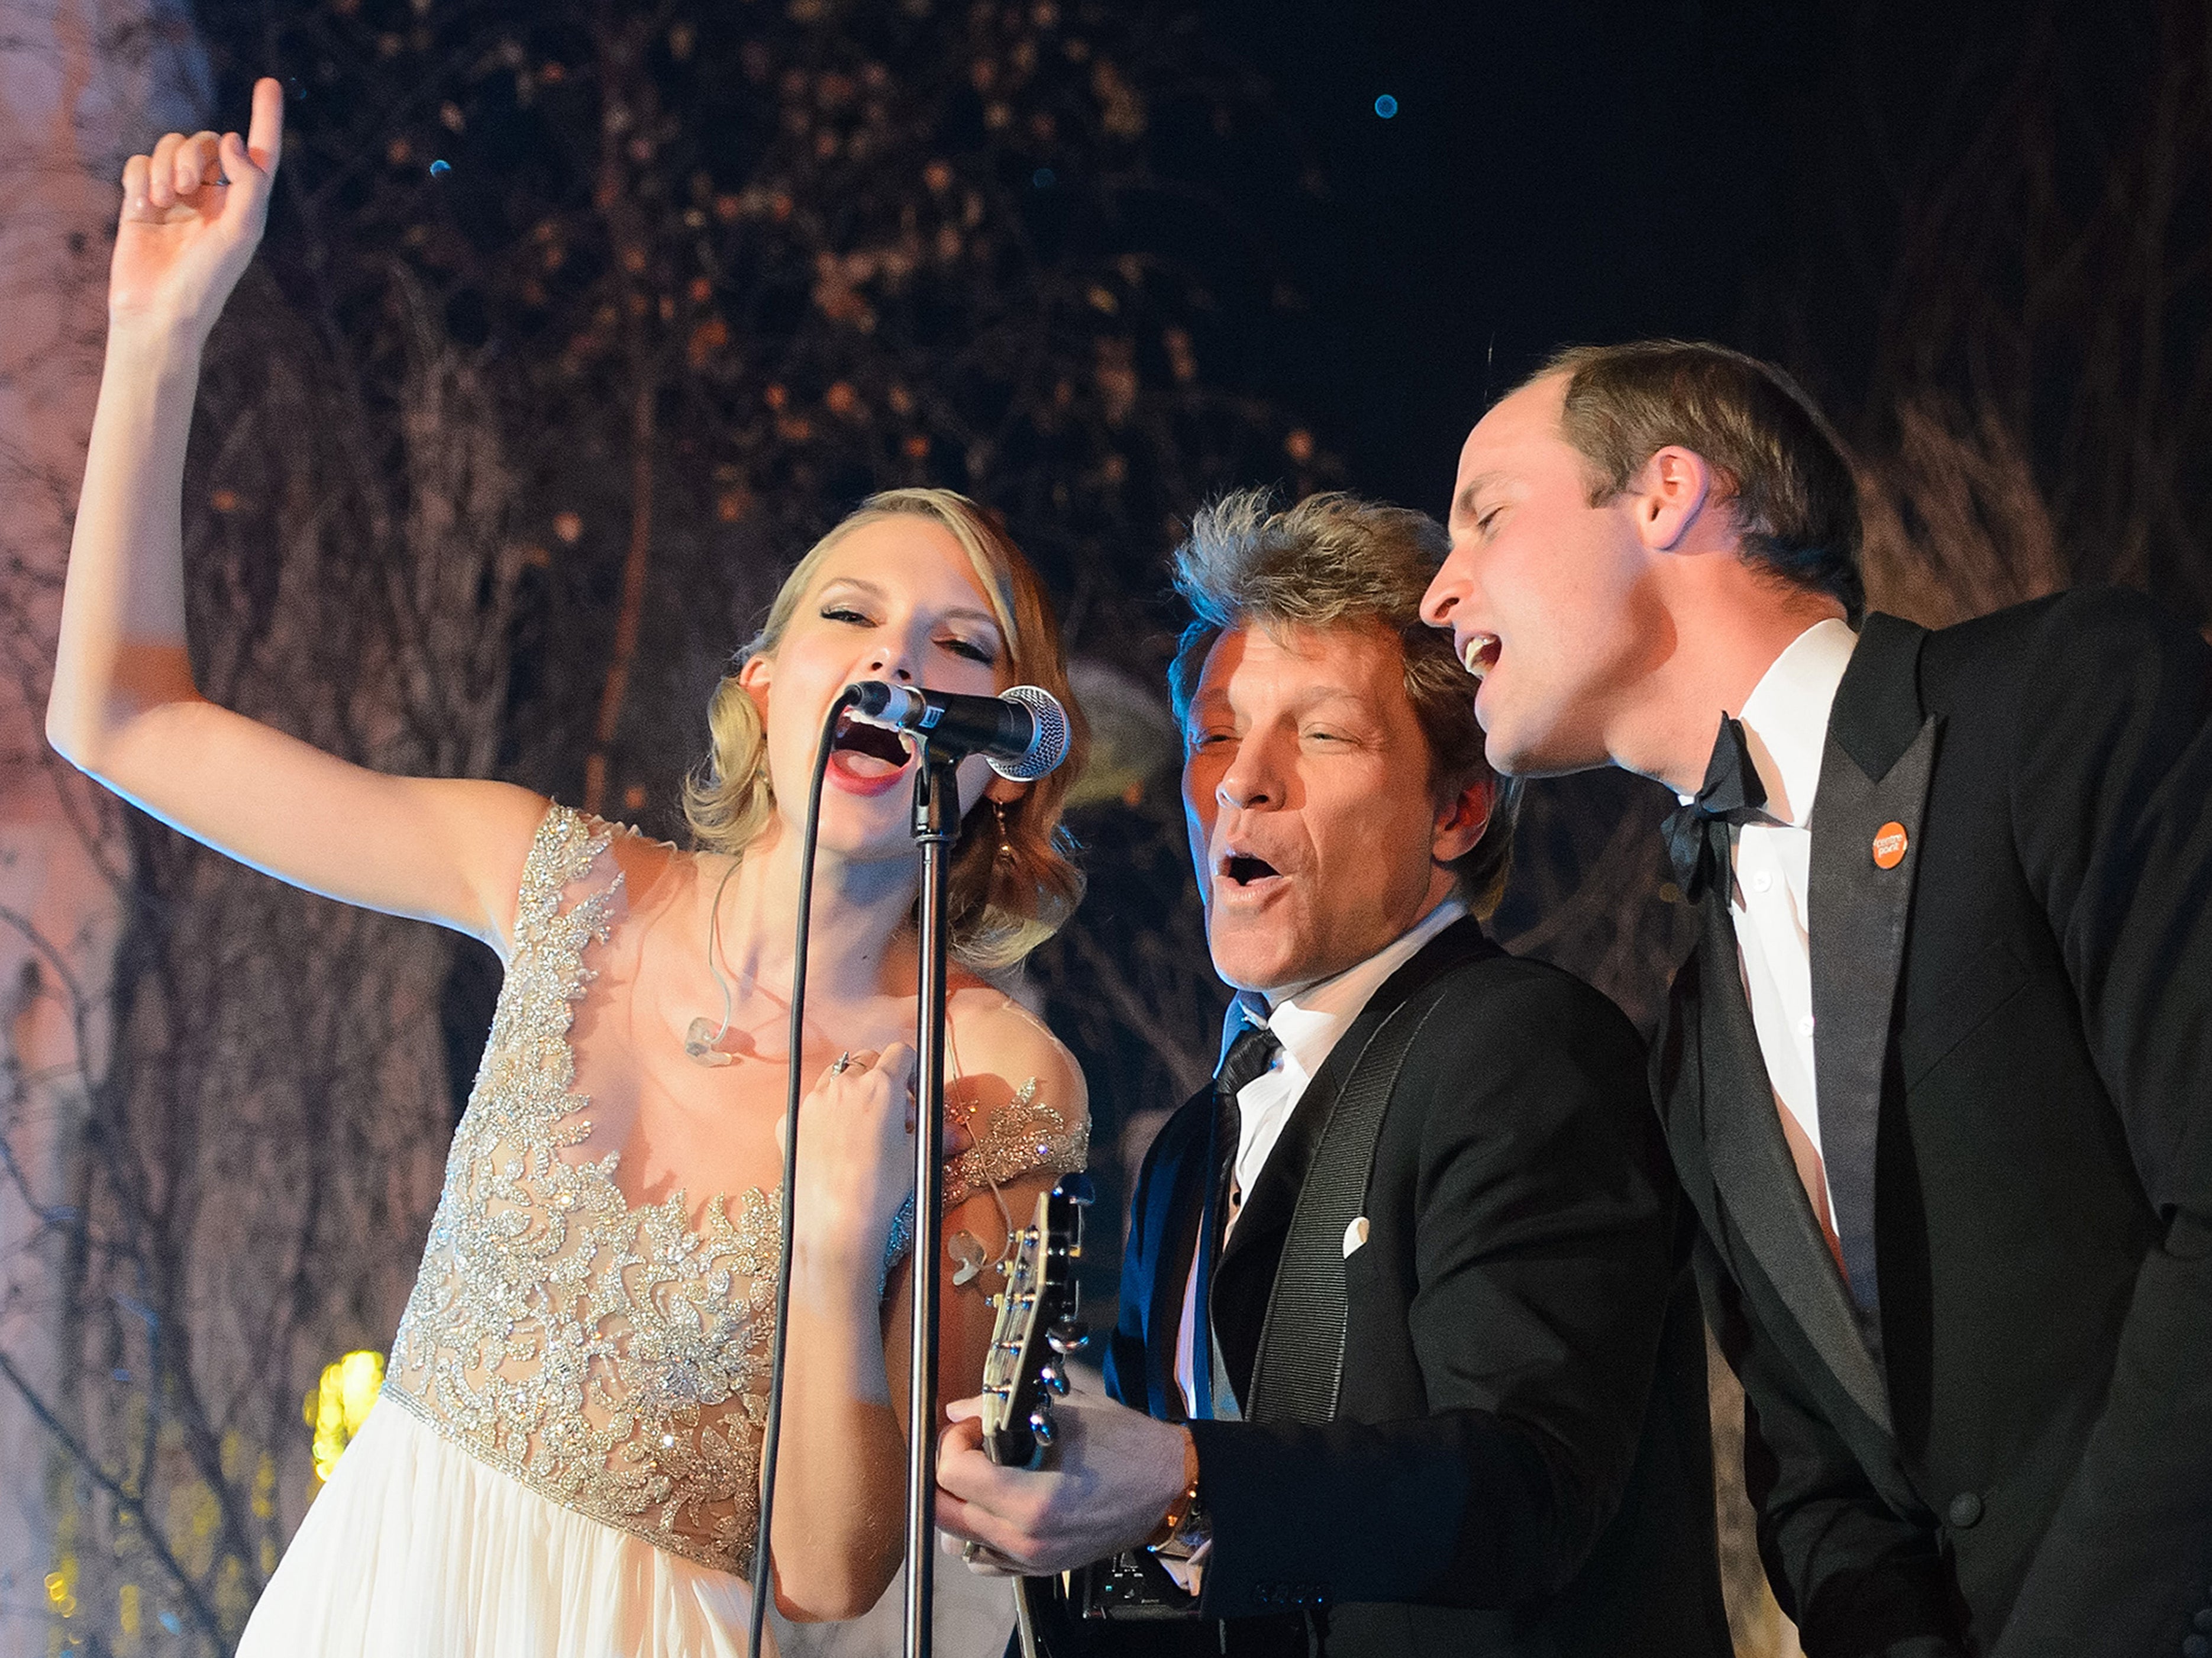 Prince William, Duke of Cambridge, (R) sings with Taylor Swift (L) and Jon Bon Jovi (C) at the Centrepoint Gala Dinner at Kensington Palace in 2013